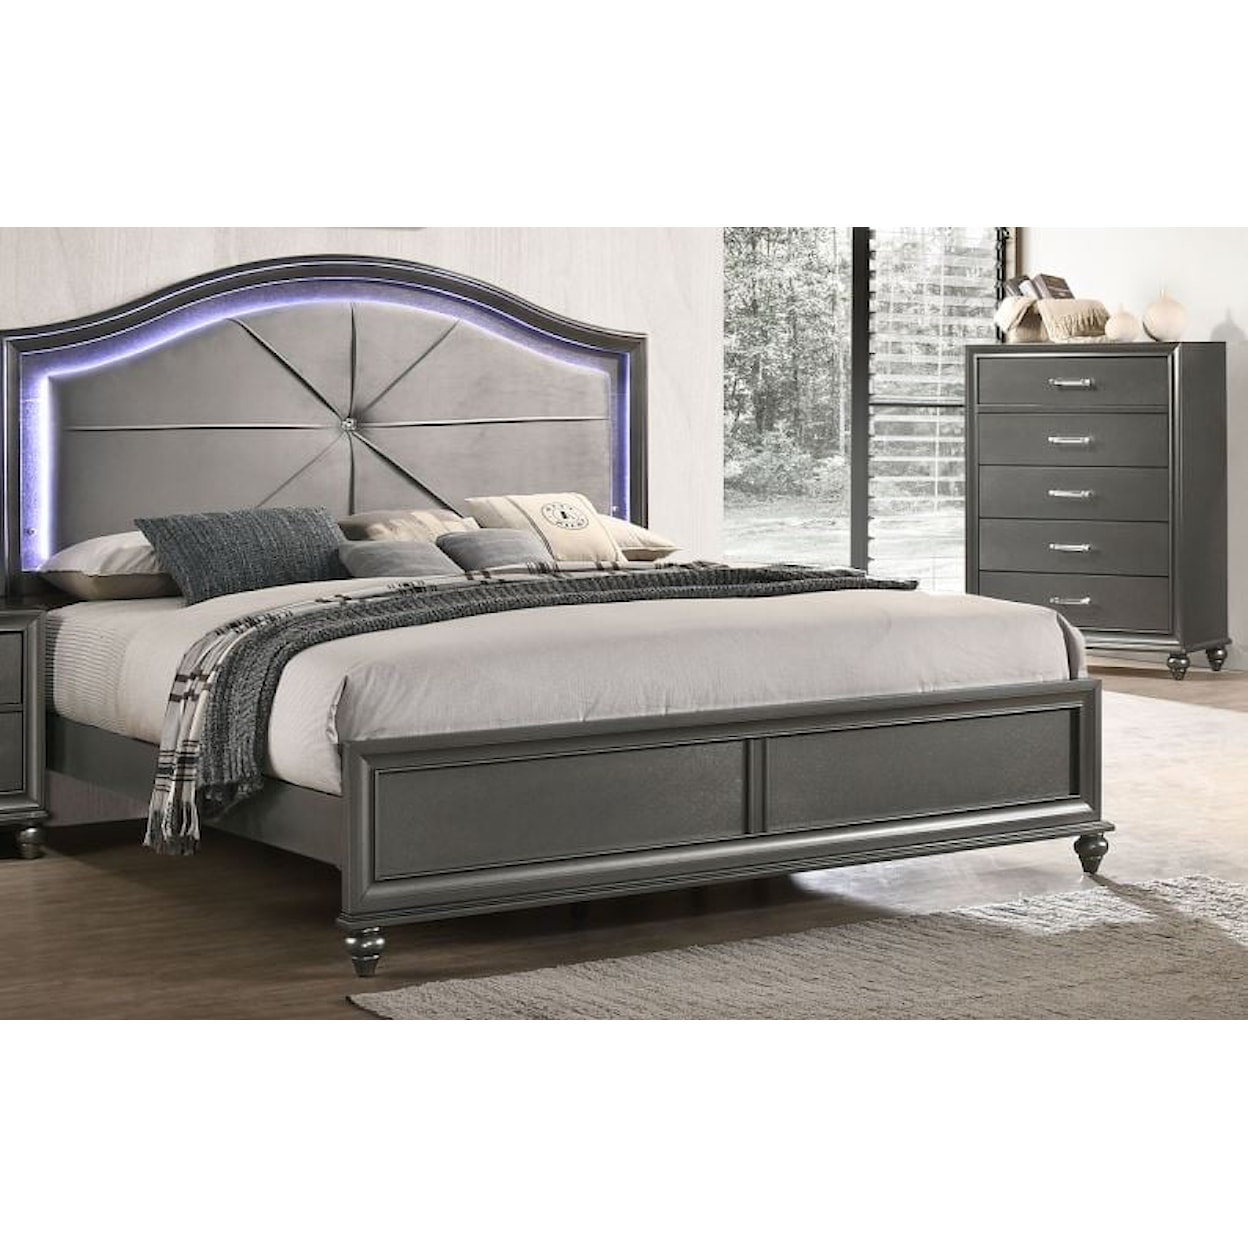 Lifestyle C8318 King Size Bed